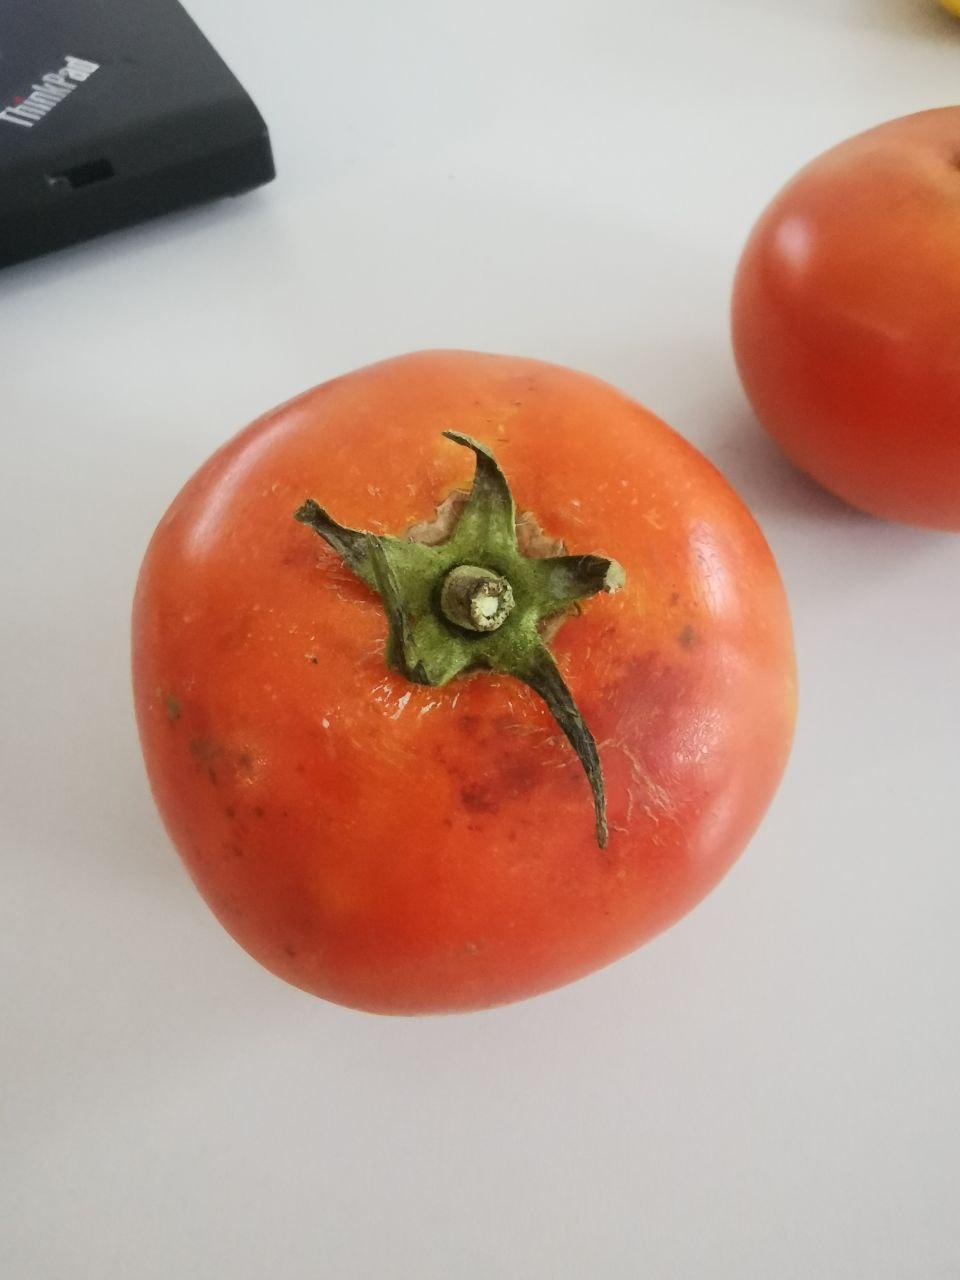 A tomato on a white surface

Description automatically generated